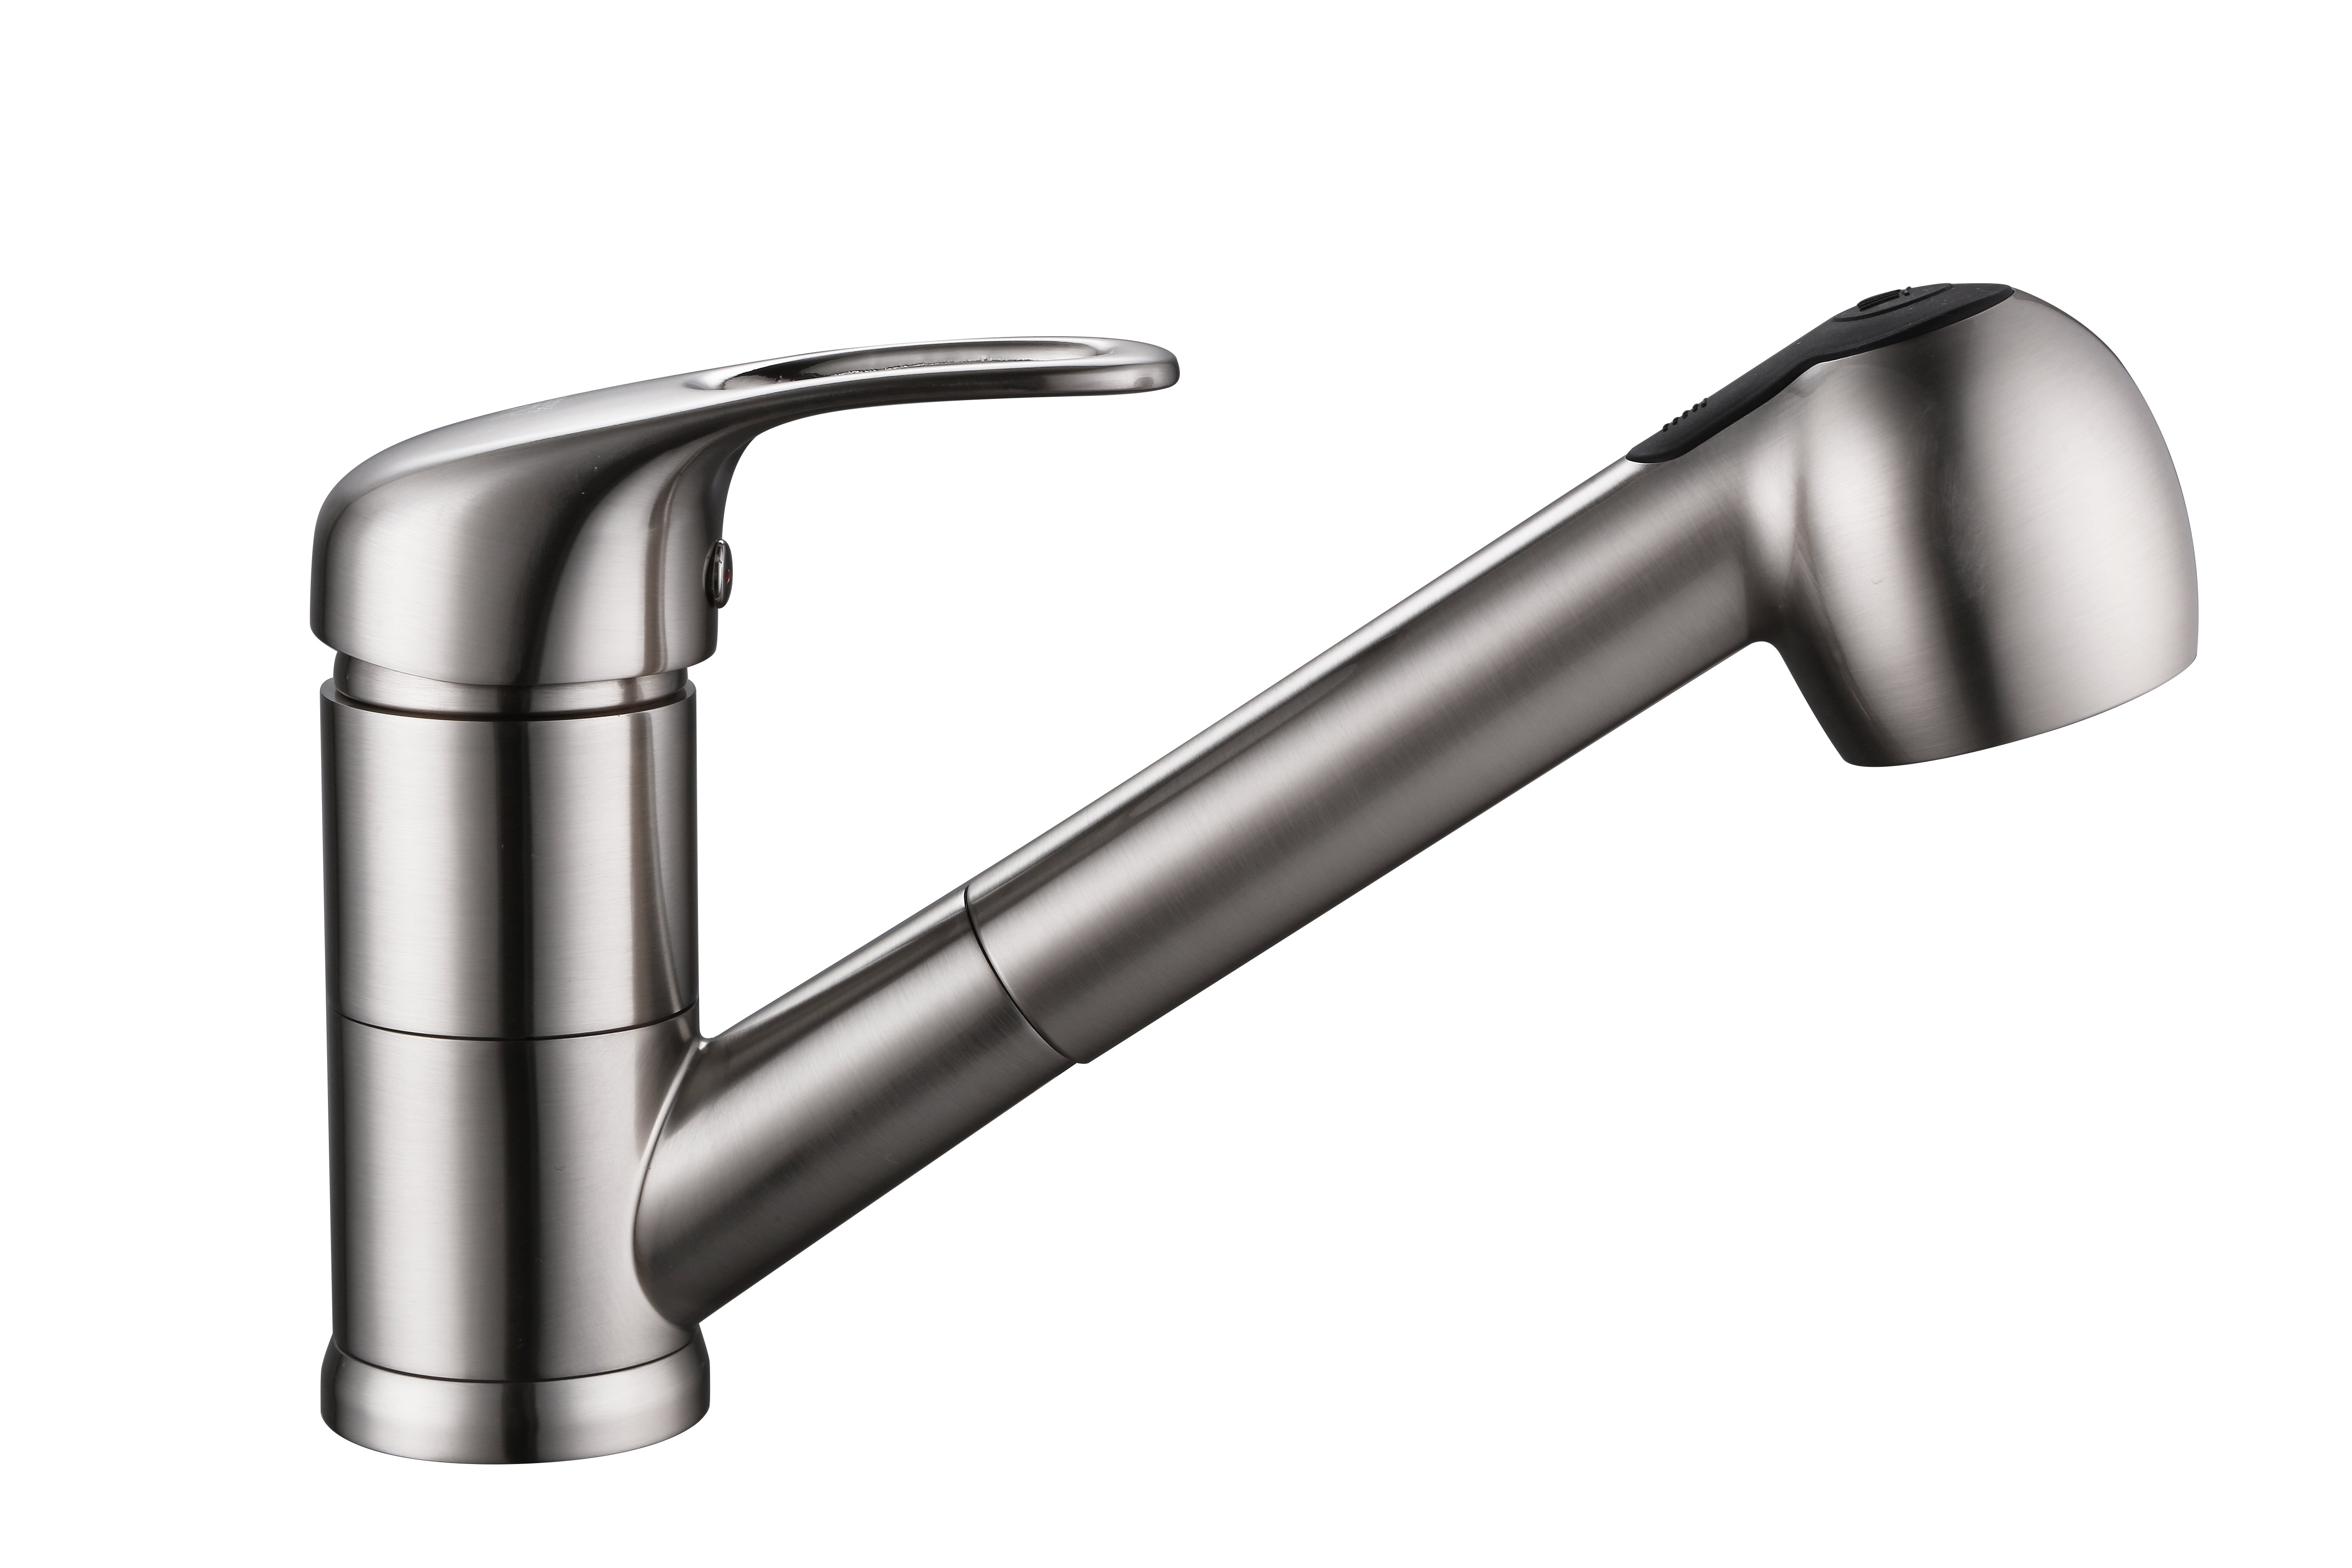 AA Faucet Pull Out Sprayer, Single Handle, Brushed Nickel Stainless Steel Kitchen Sink Faucet